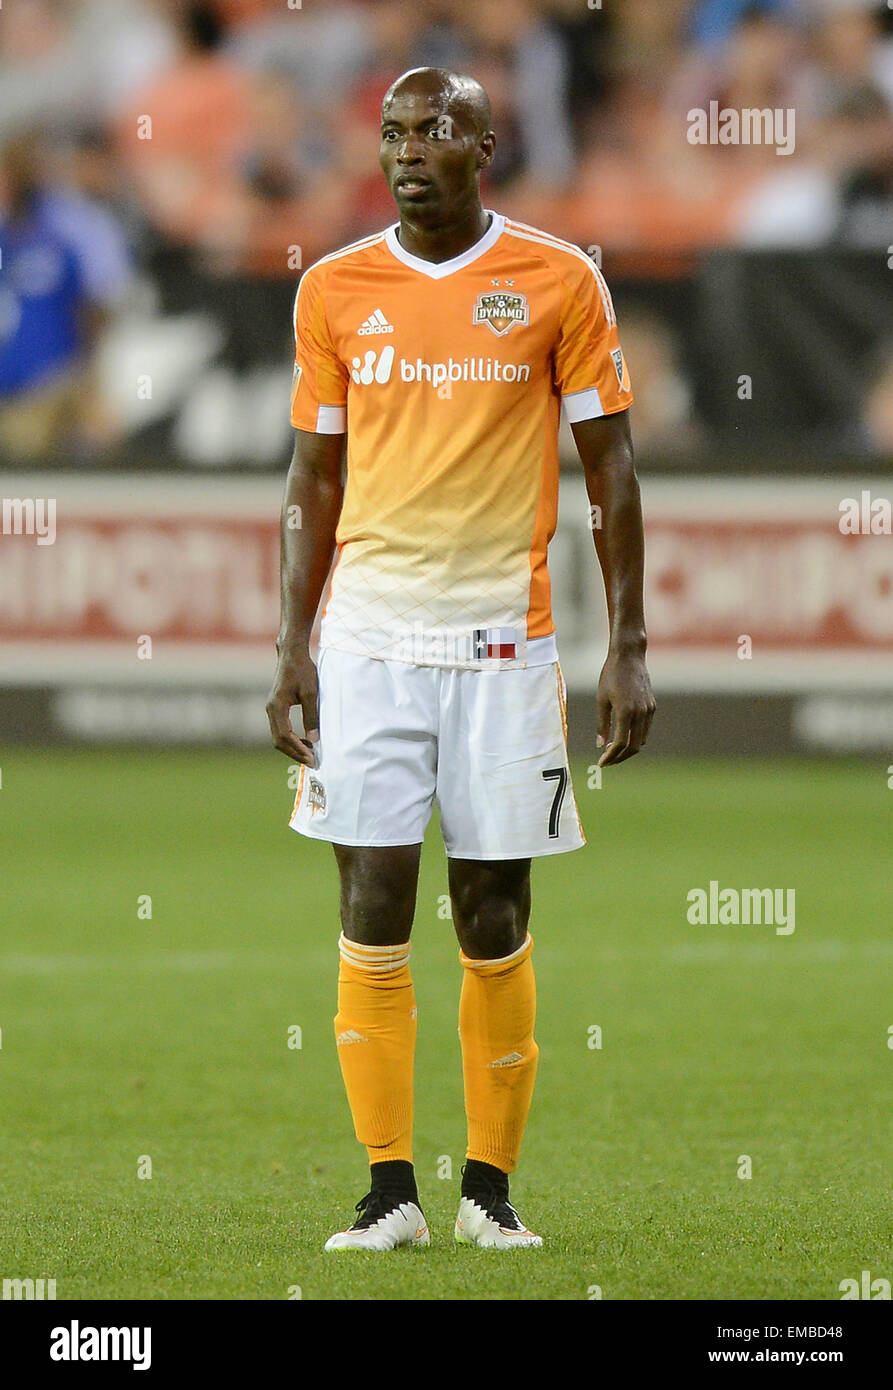 Washington, DC, USA. 18th Apr, 2015. 20150418 - Houston Dynamo defender DaMarcus Beasley (7) is seen in the second half of an MLS match against D.C. United at RFK Stadium in Washington. United and the Dynamo tied 1-1. © Chuck Myers/ZUMA Wire/Alamy Live News Stock Photo